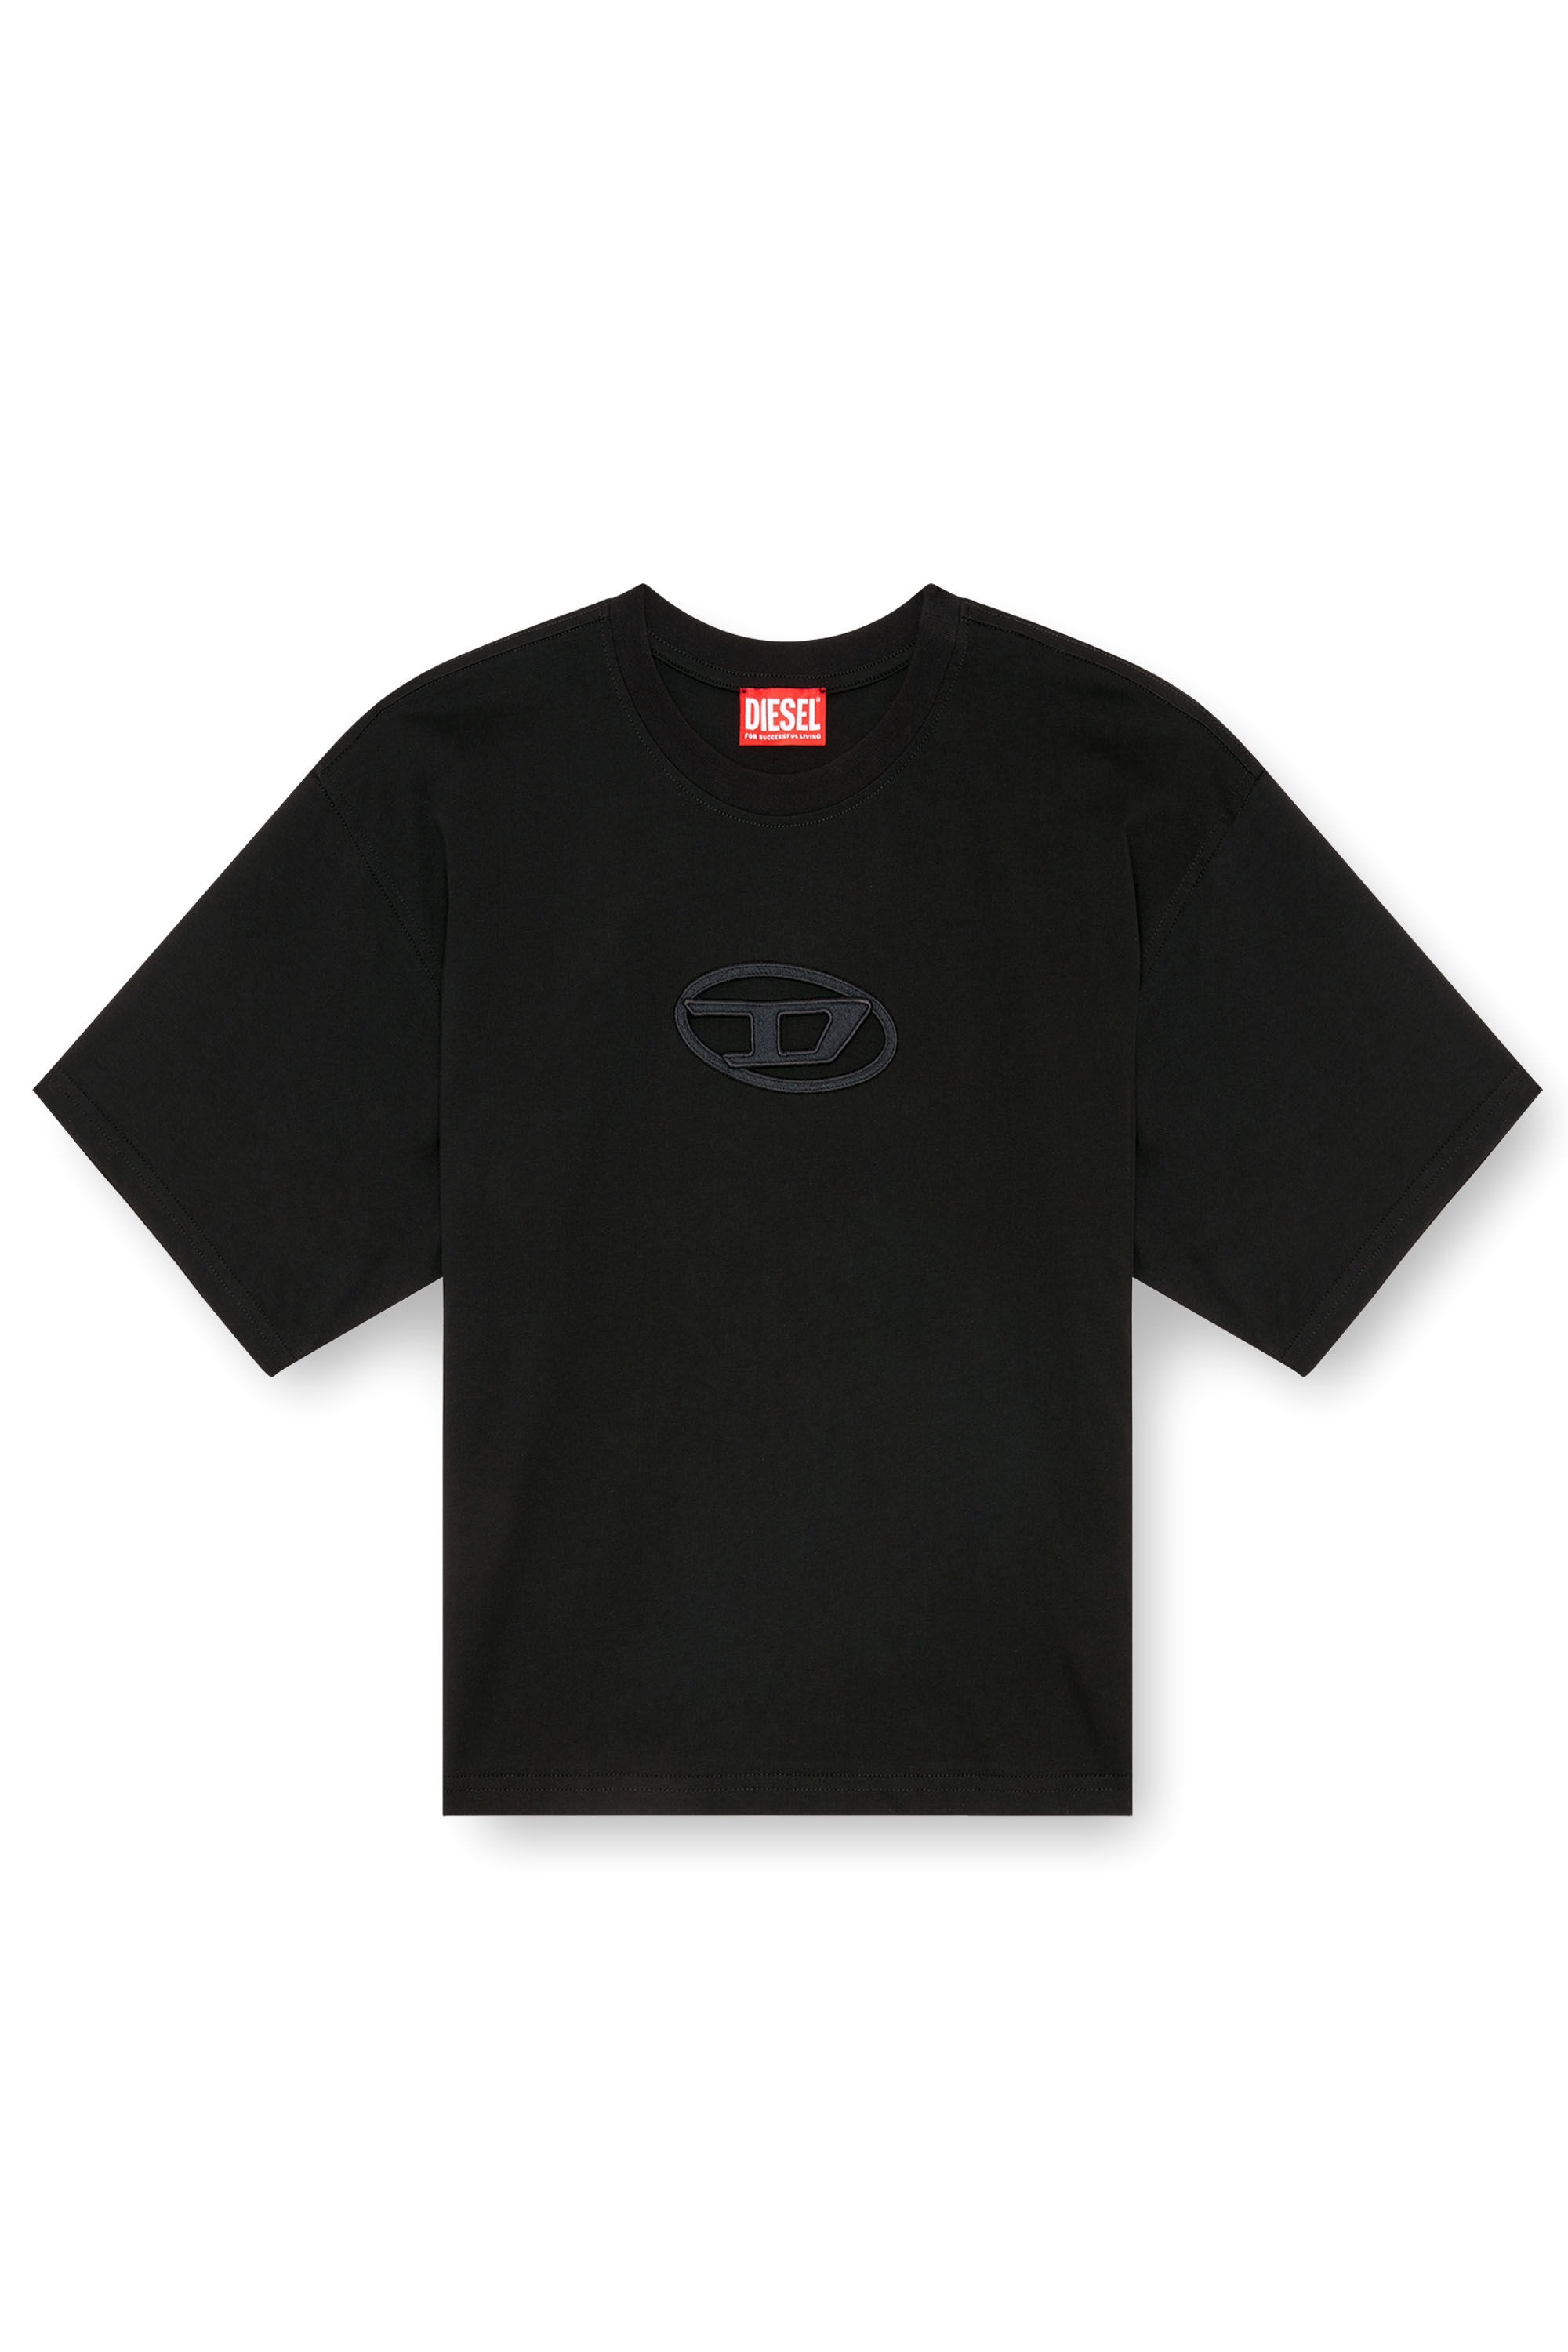 Women's Boxy T-shirt with cut-out Oval D logo | Black | Diesel